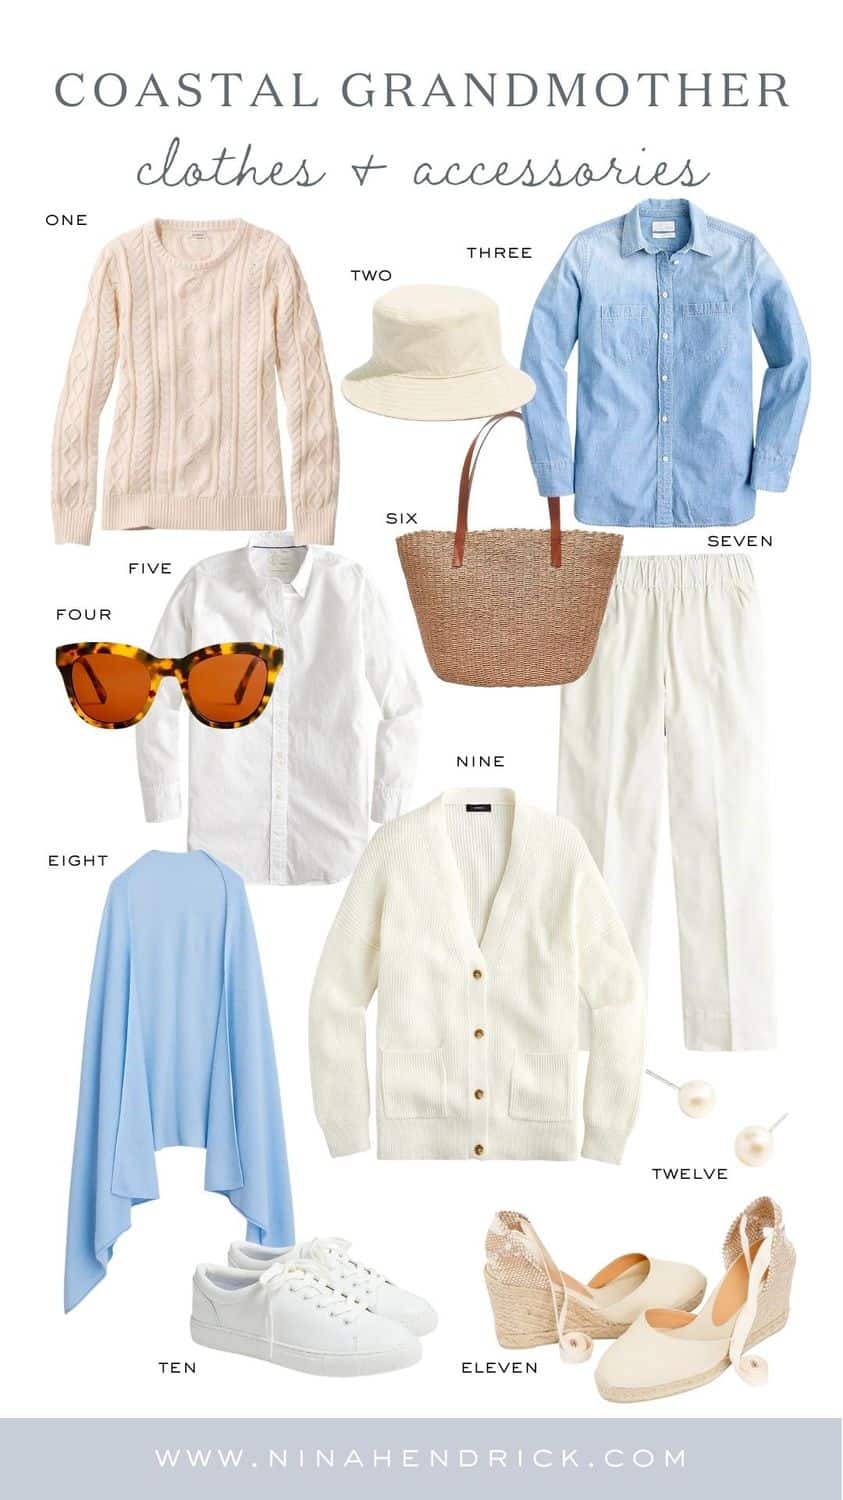 Product roundup mood board of Coastal Grandmother style clothing and accessories